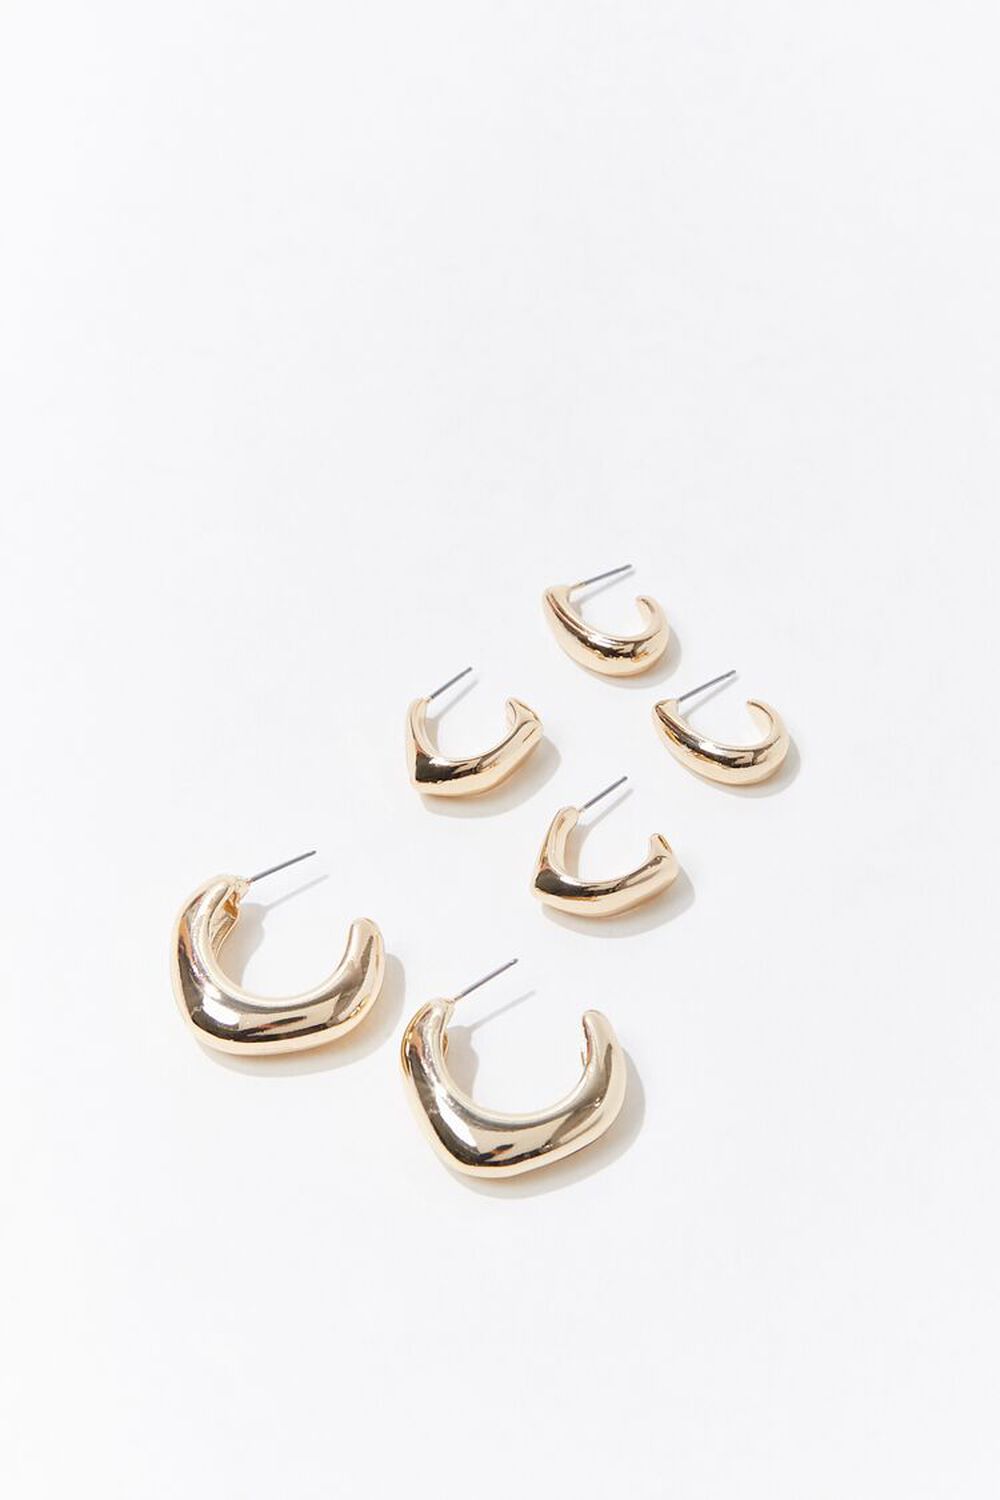 GOLD Small Hoop Earring Set, image 1